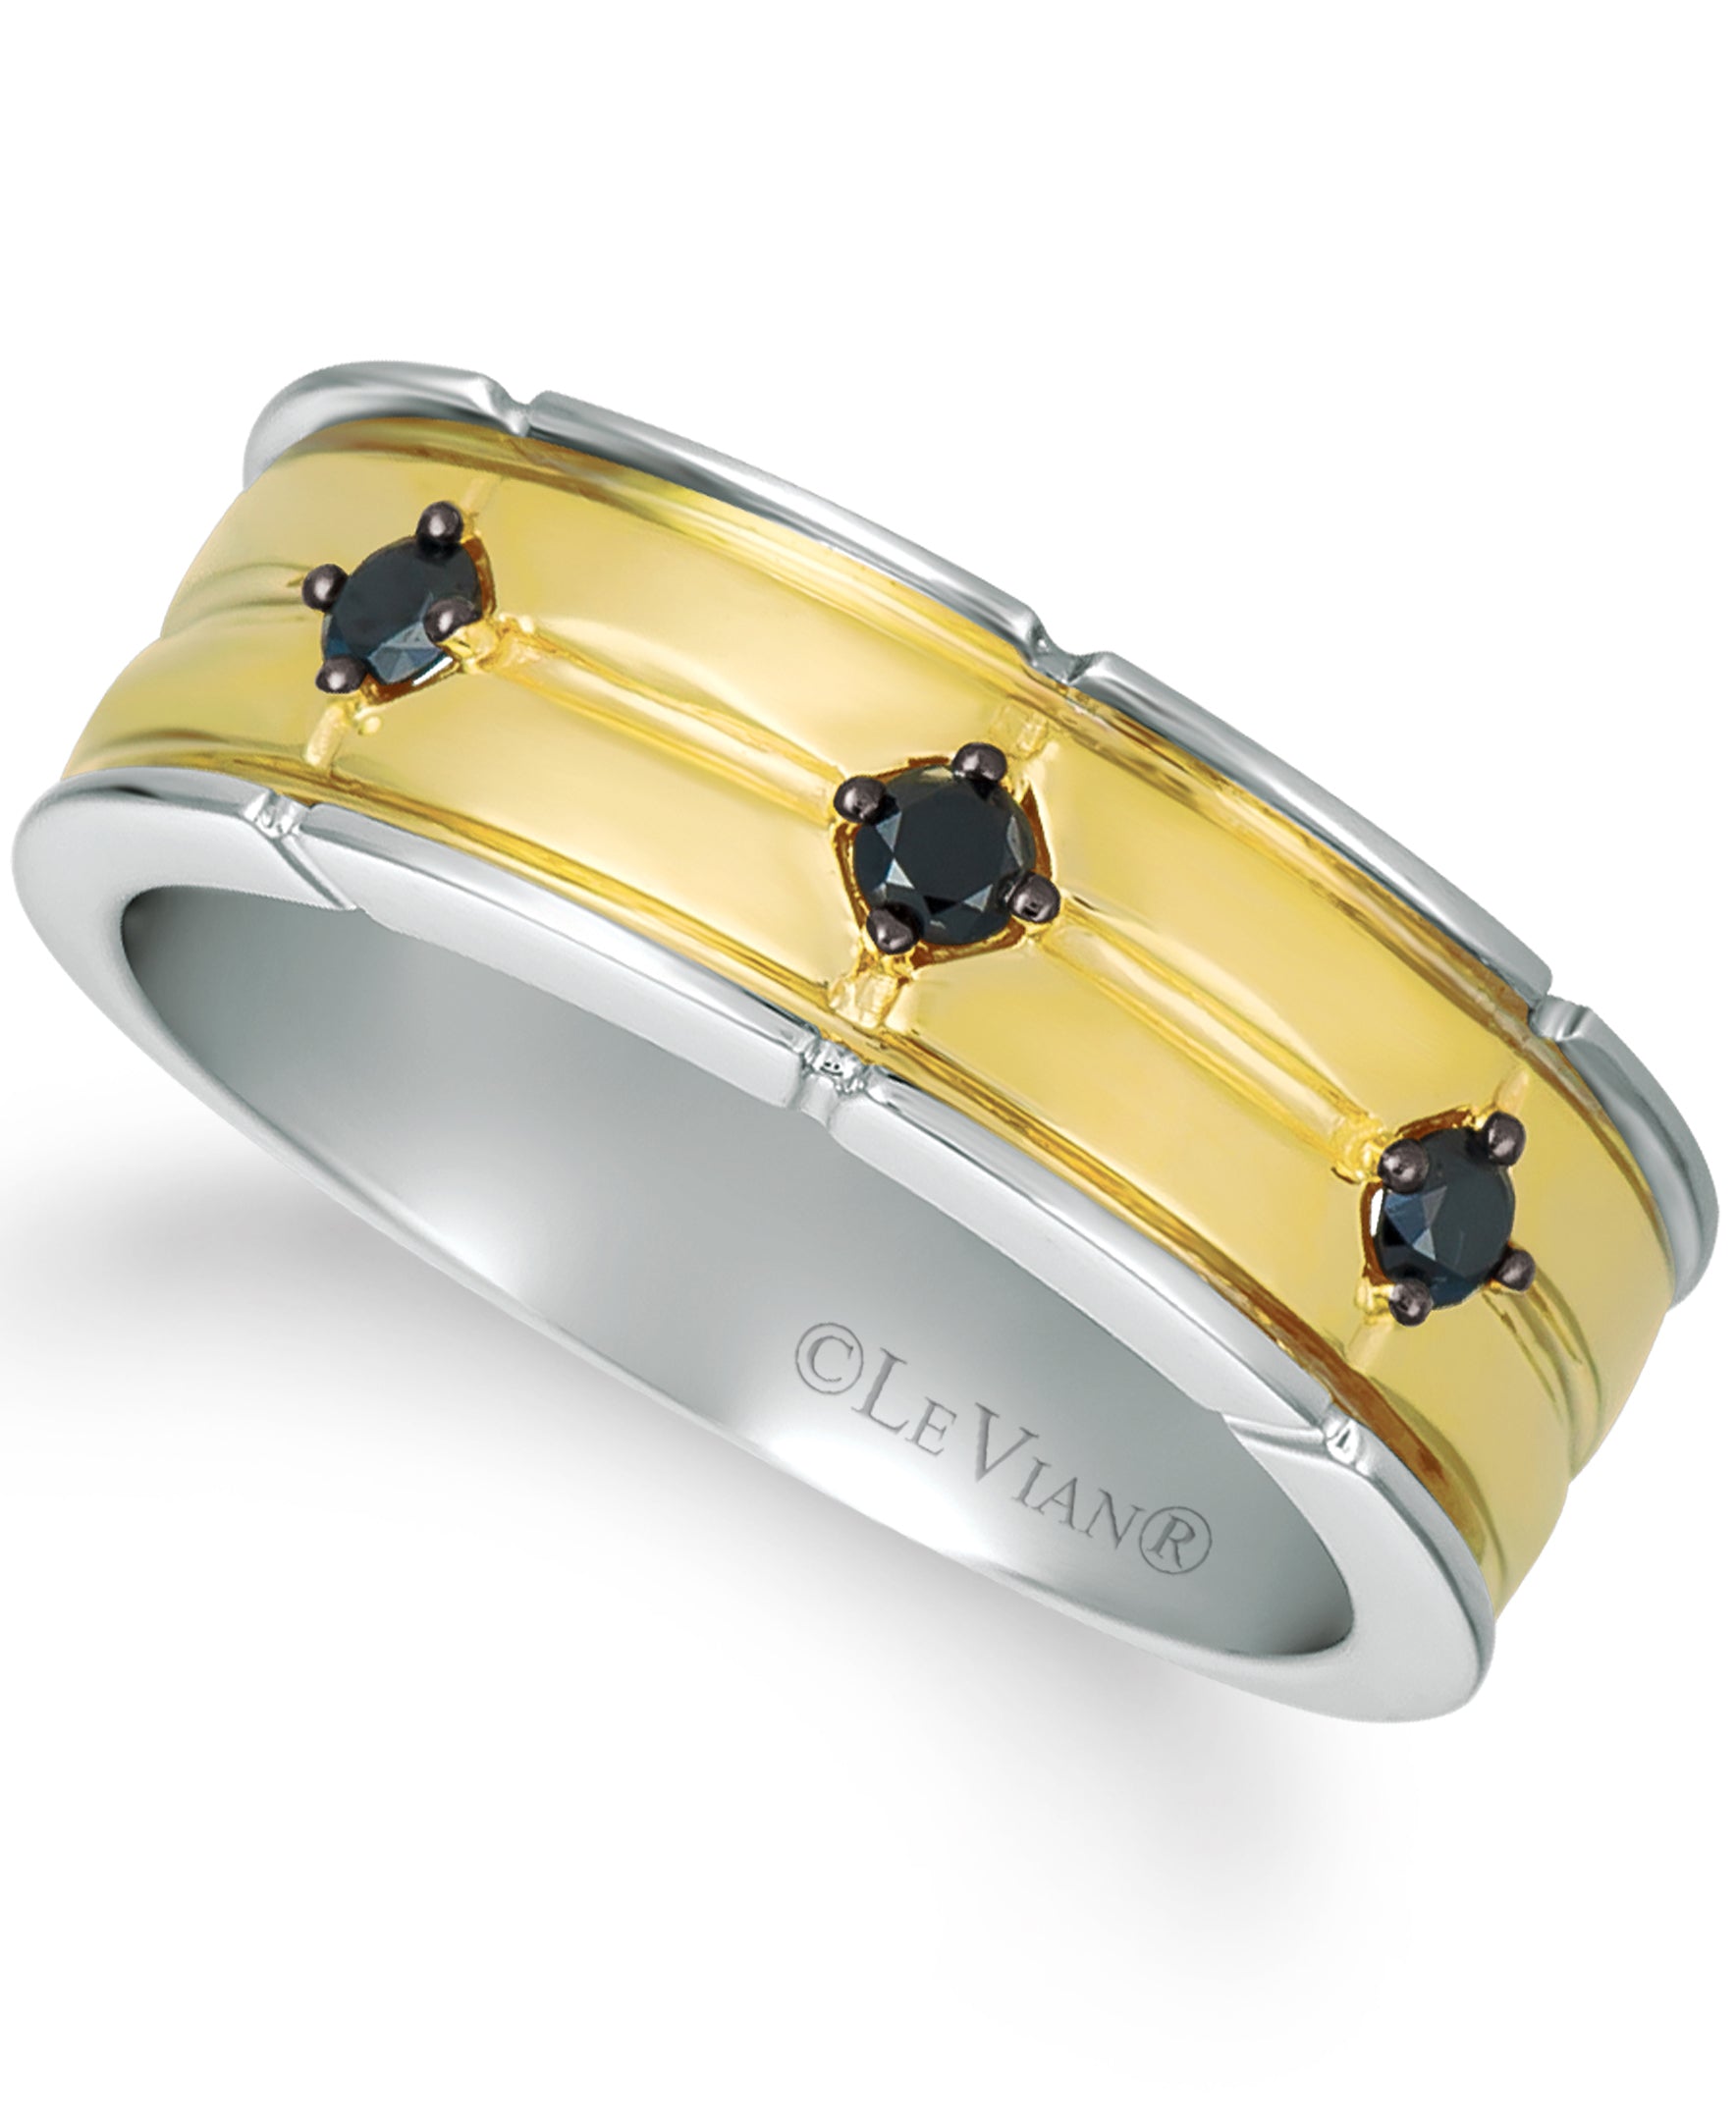 Le Vian Exotics Ring featuring Blackberry Diamonds set in 14K Two Tone Gold